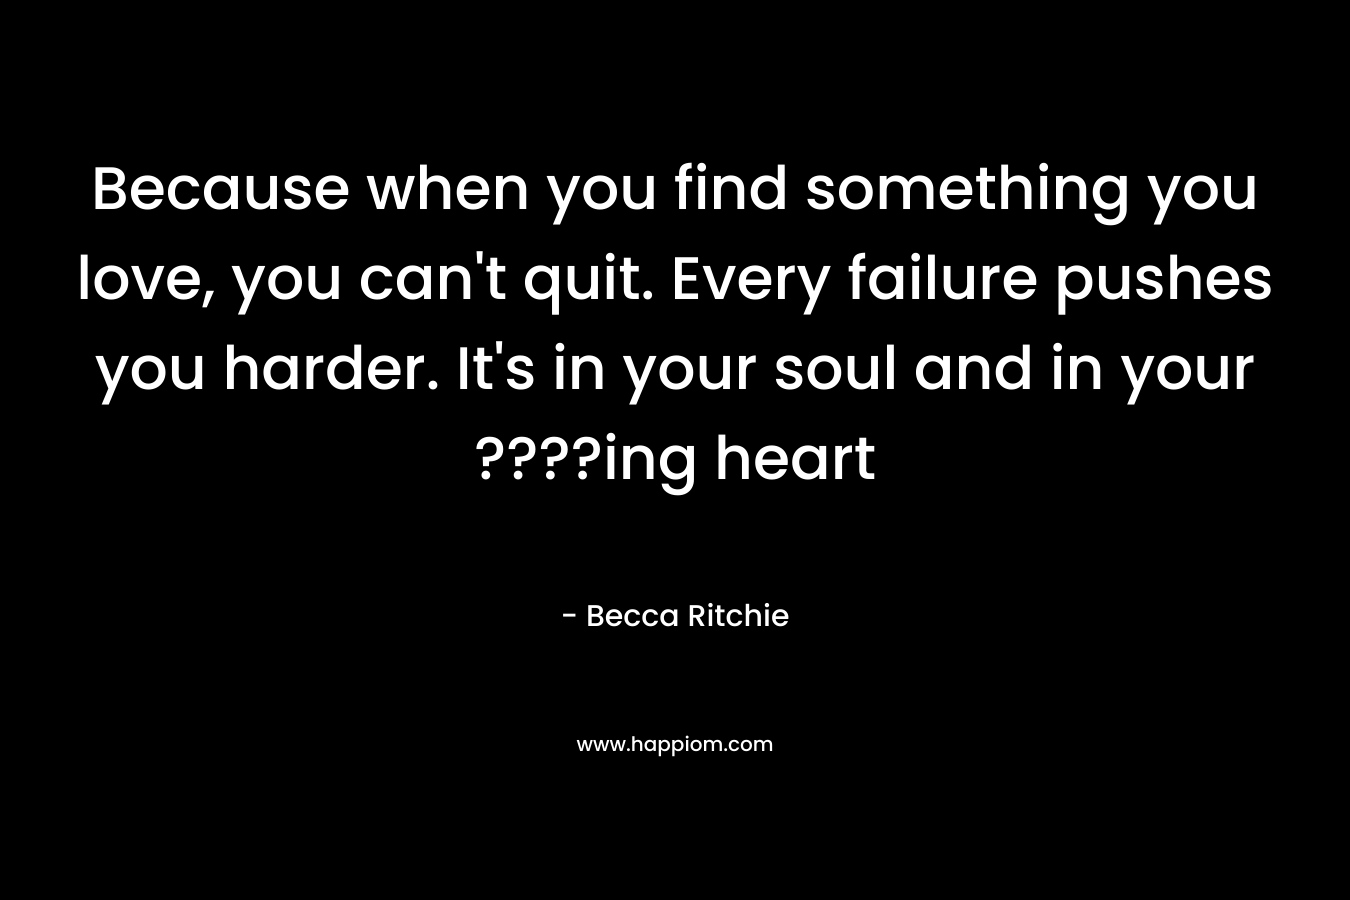 Because when you find something you love, you can't quit. Every failure pushes you harder. It's in your soul and in your ????ing heart